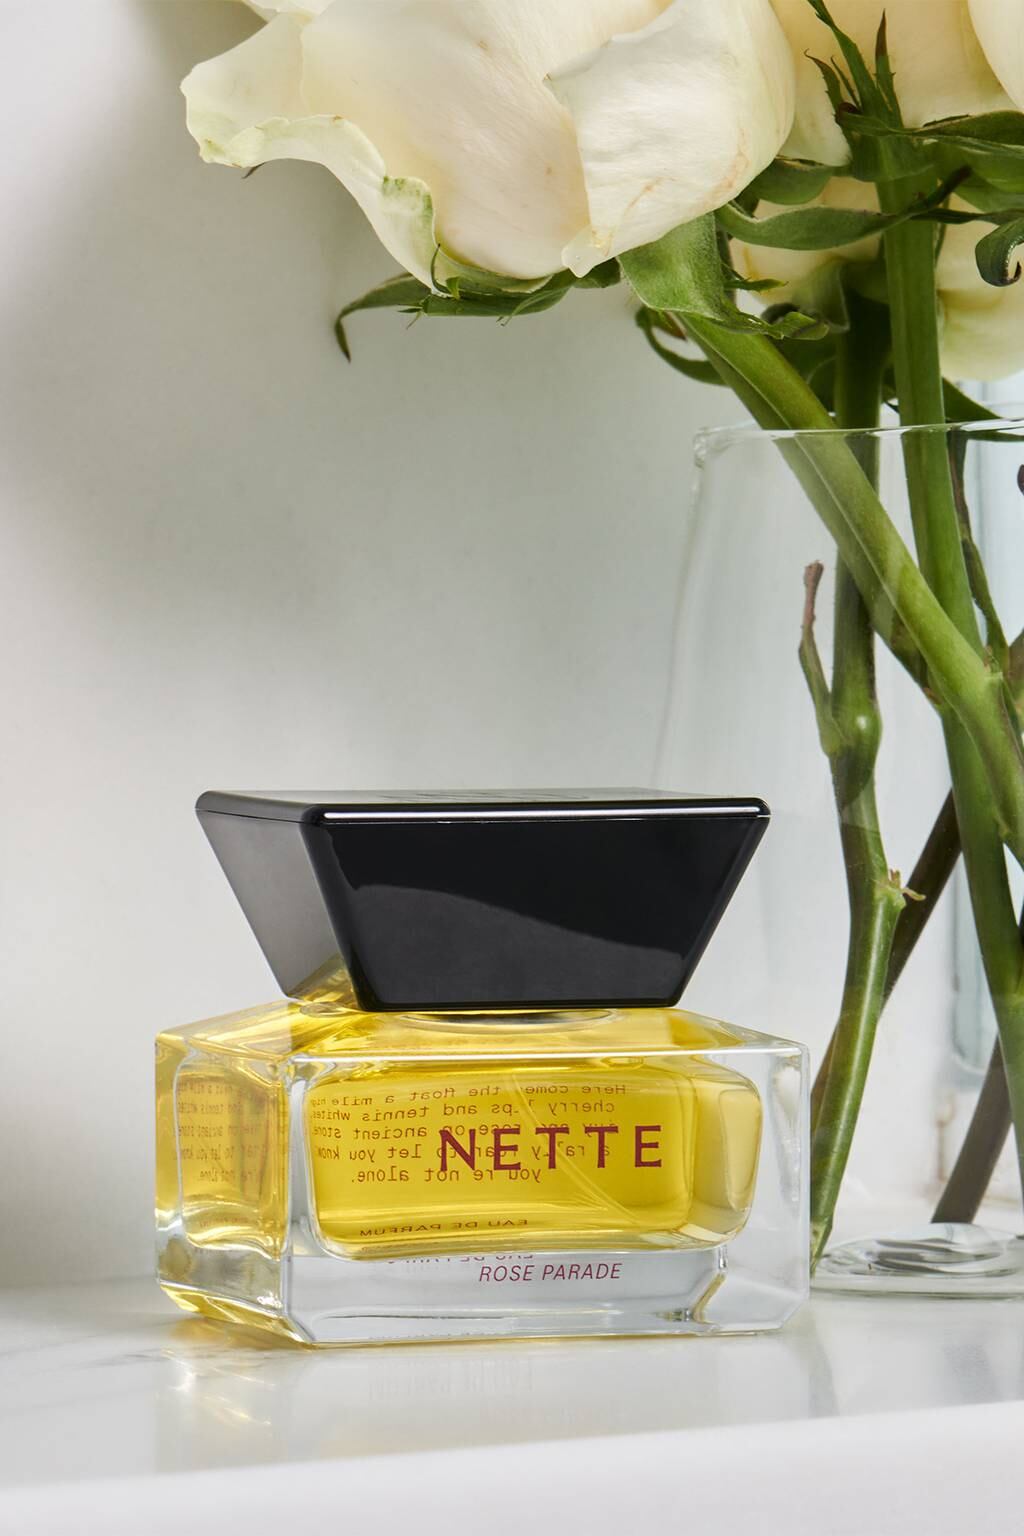 A number of technologies are driving change in fragrance.